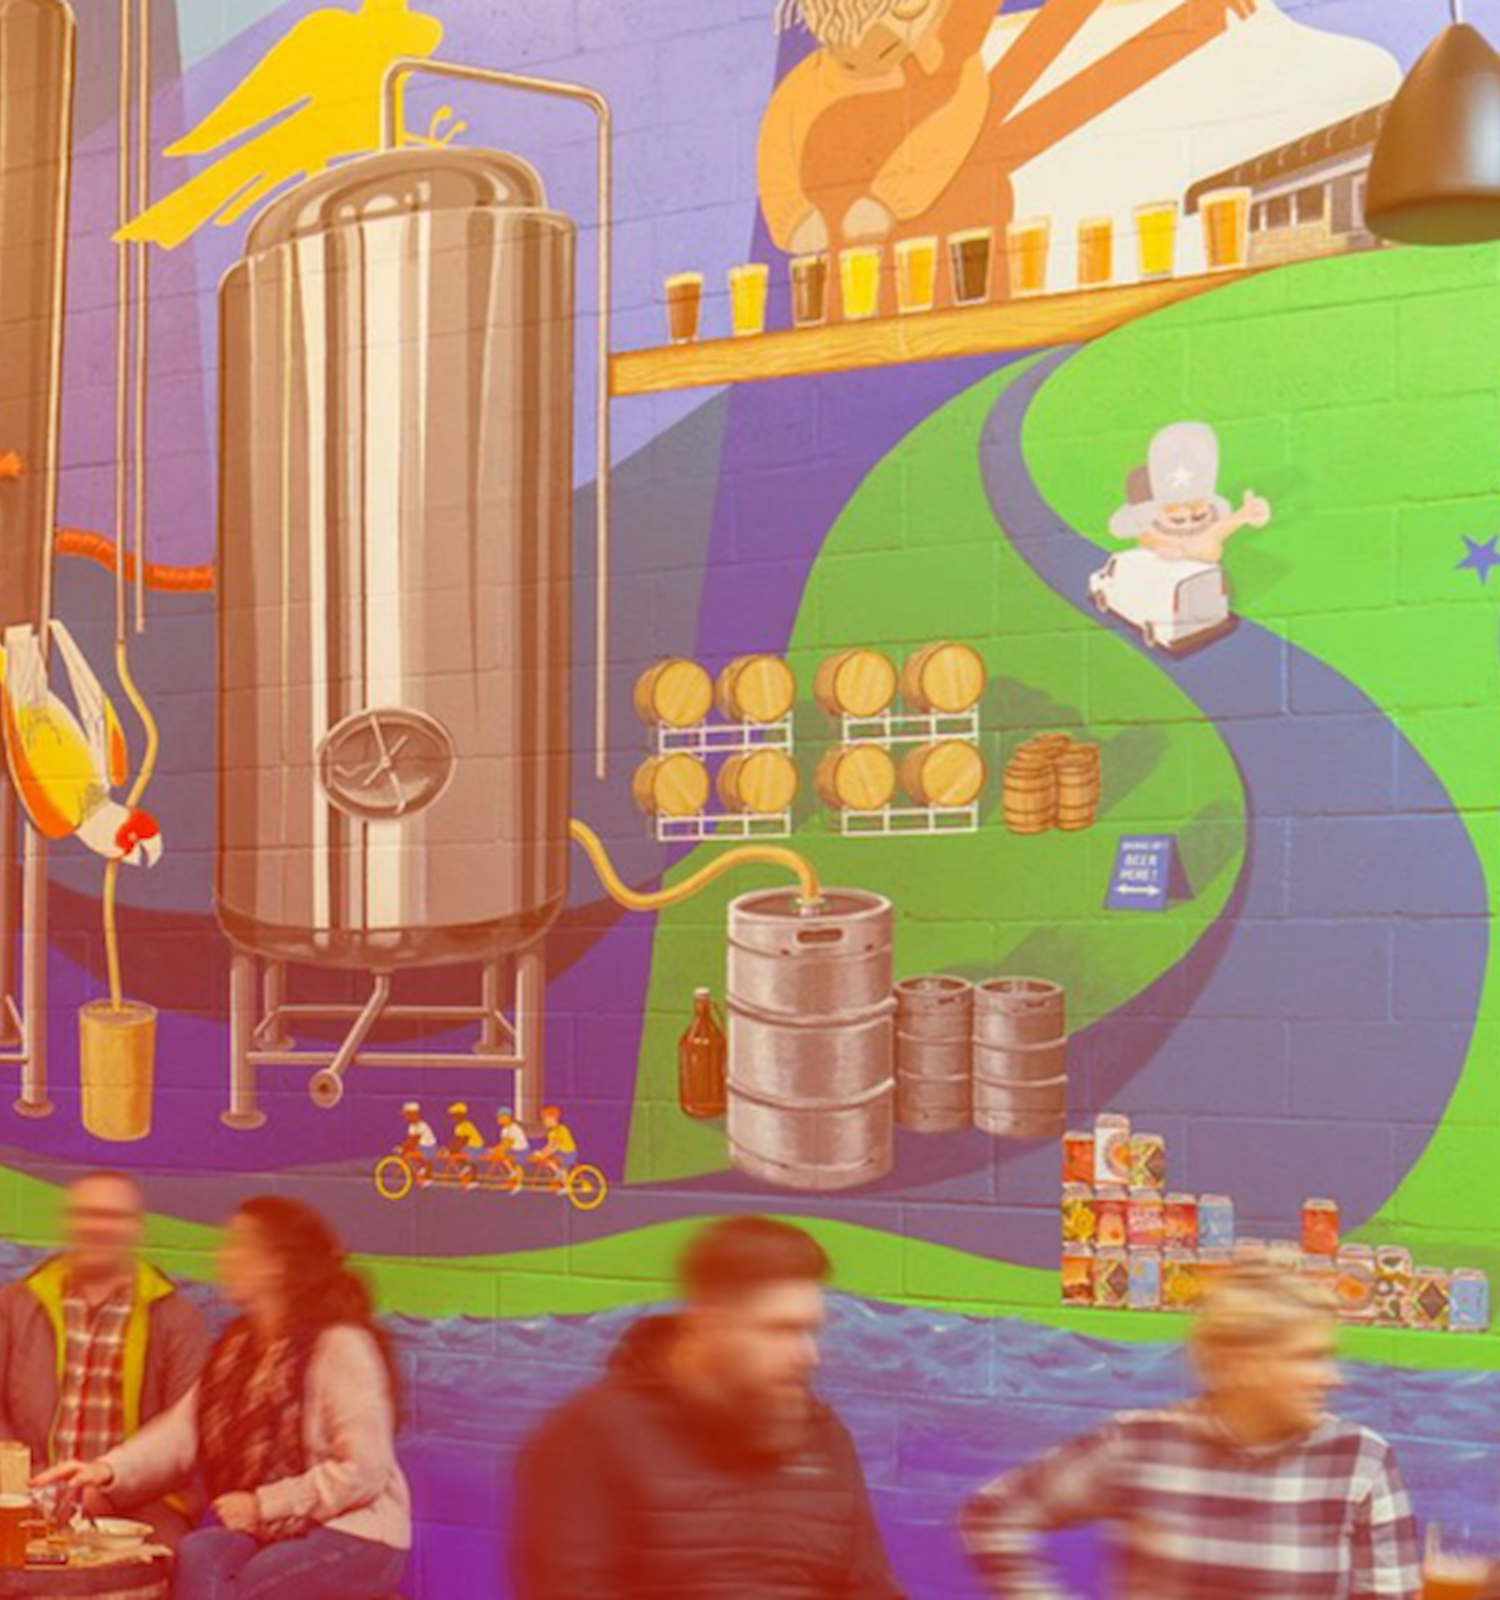 A vibrant mural with brewery themes, tanks, and playful artwork is visited by people at a rooftop setting with a casual, social vibe.